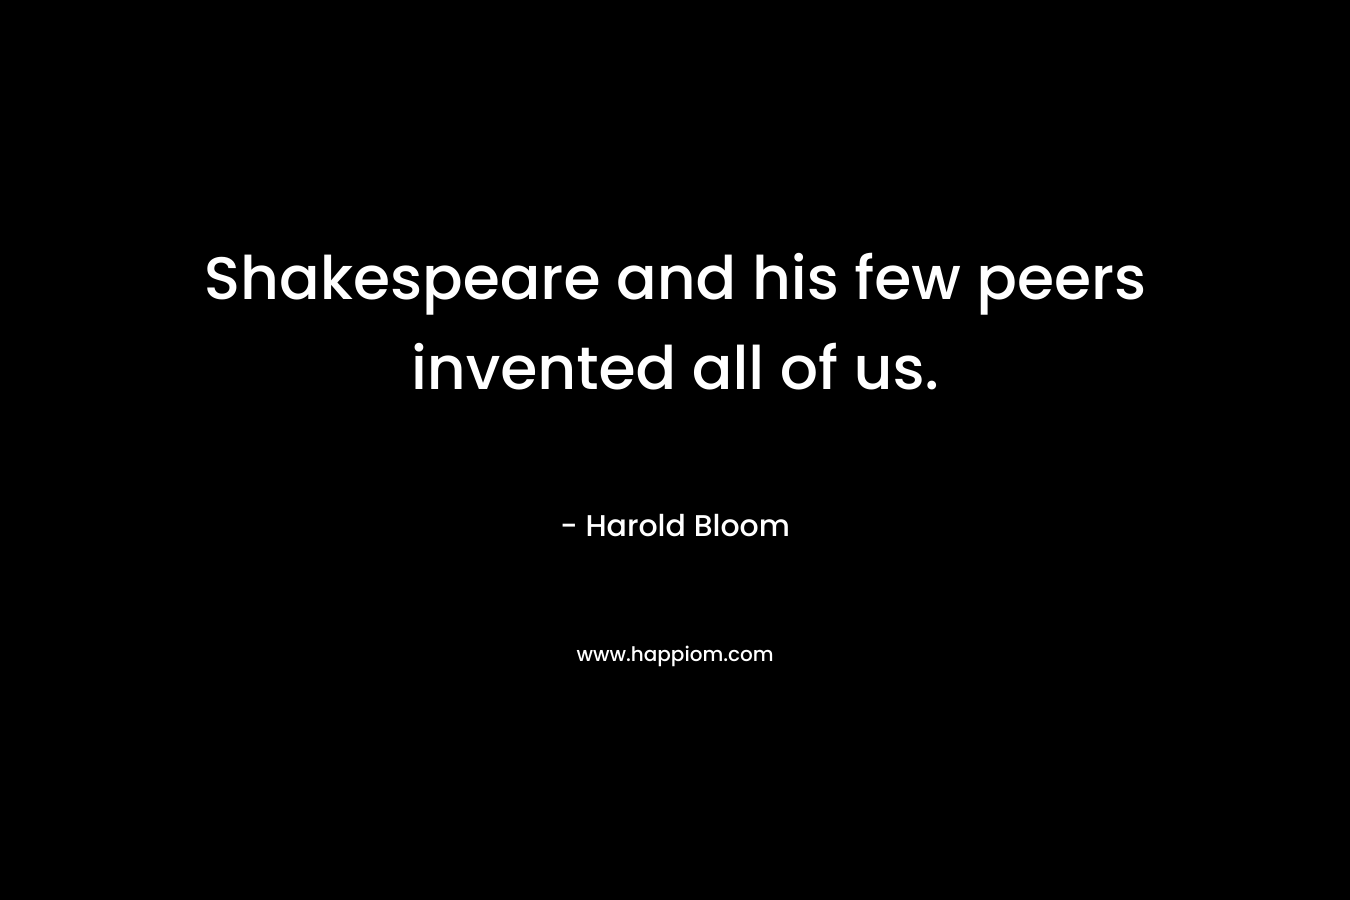 Shakespeare and his few peers invented all of us.